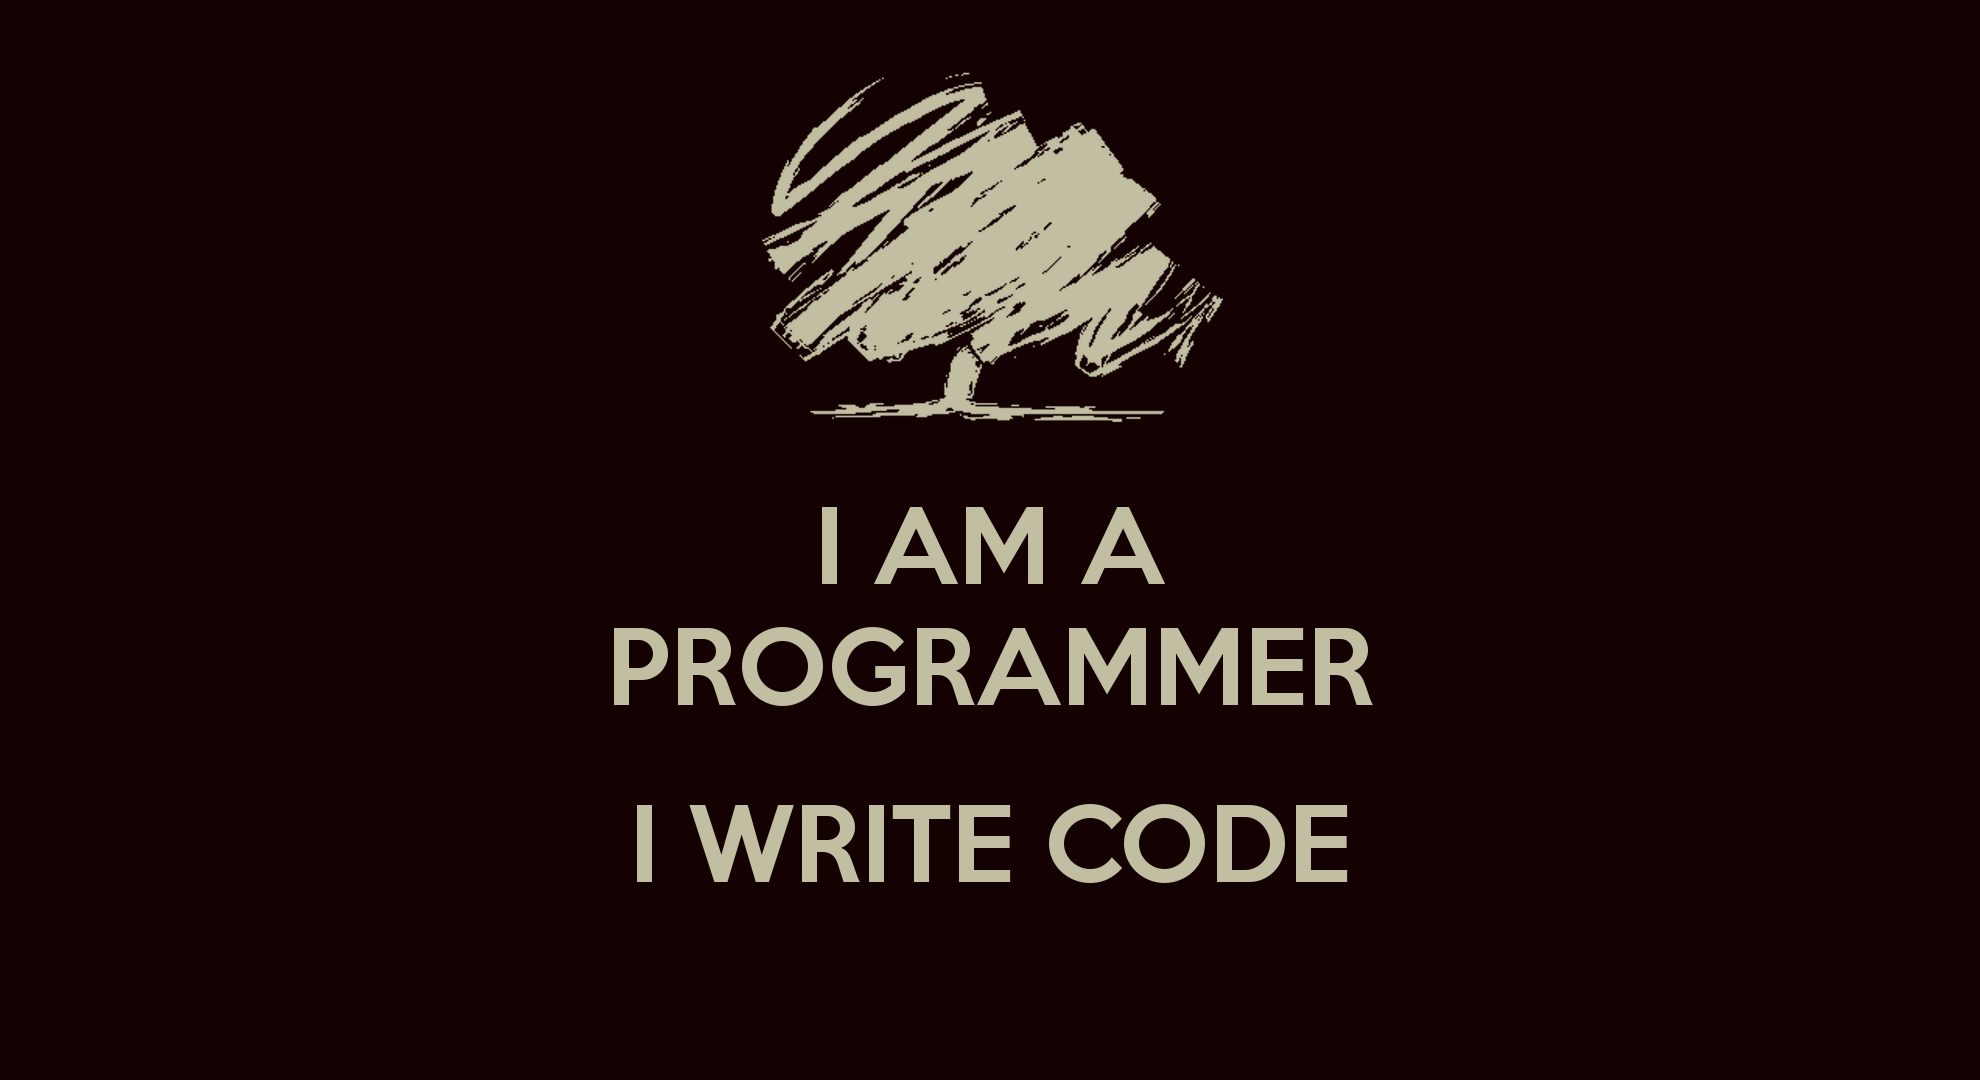 Signs you aren't meant to be a programmer